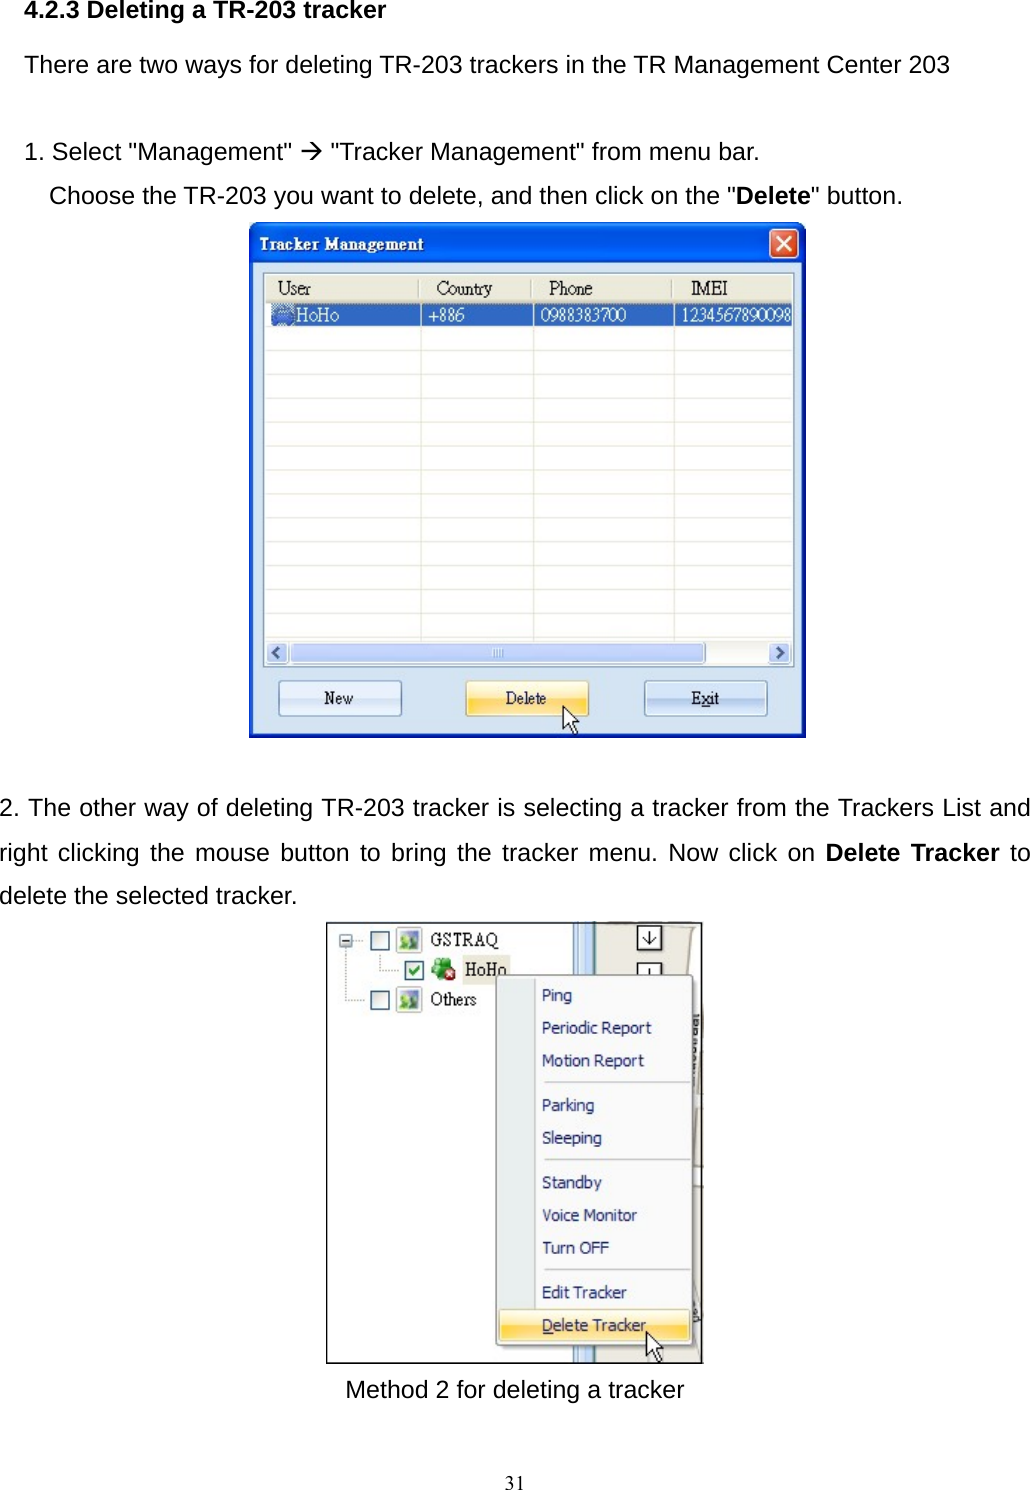 4.2.3 Deleting a TR-203 tracker There are two ways for deleting TR-203 trackers in the TR Management Center 203  1. Select &quot;Management&quot; Æ &quot;Tracker Management&quot; from menu bar. Choose the TR-203 you want to delete, and then click on the &quot;Delete&quot; button.     2. The other way of deleting TR-203 tracker is selecting a tracker from the Trackers List and right clicking the mouse button to bring the tracker menu. Now click on Delete Tracker to delete the selected tracker.    Method 2 for deleting a tracker   31